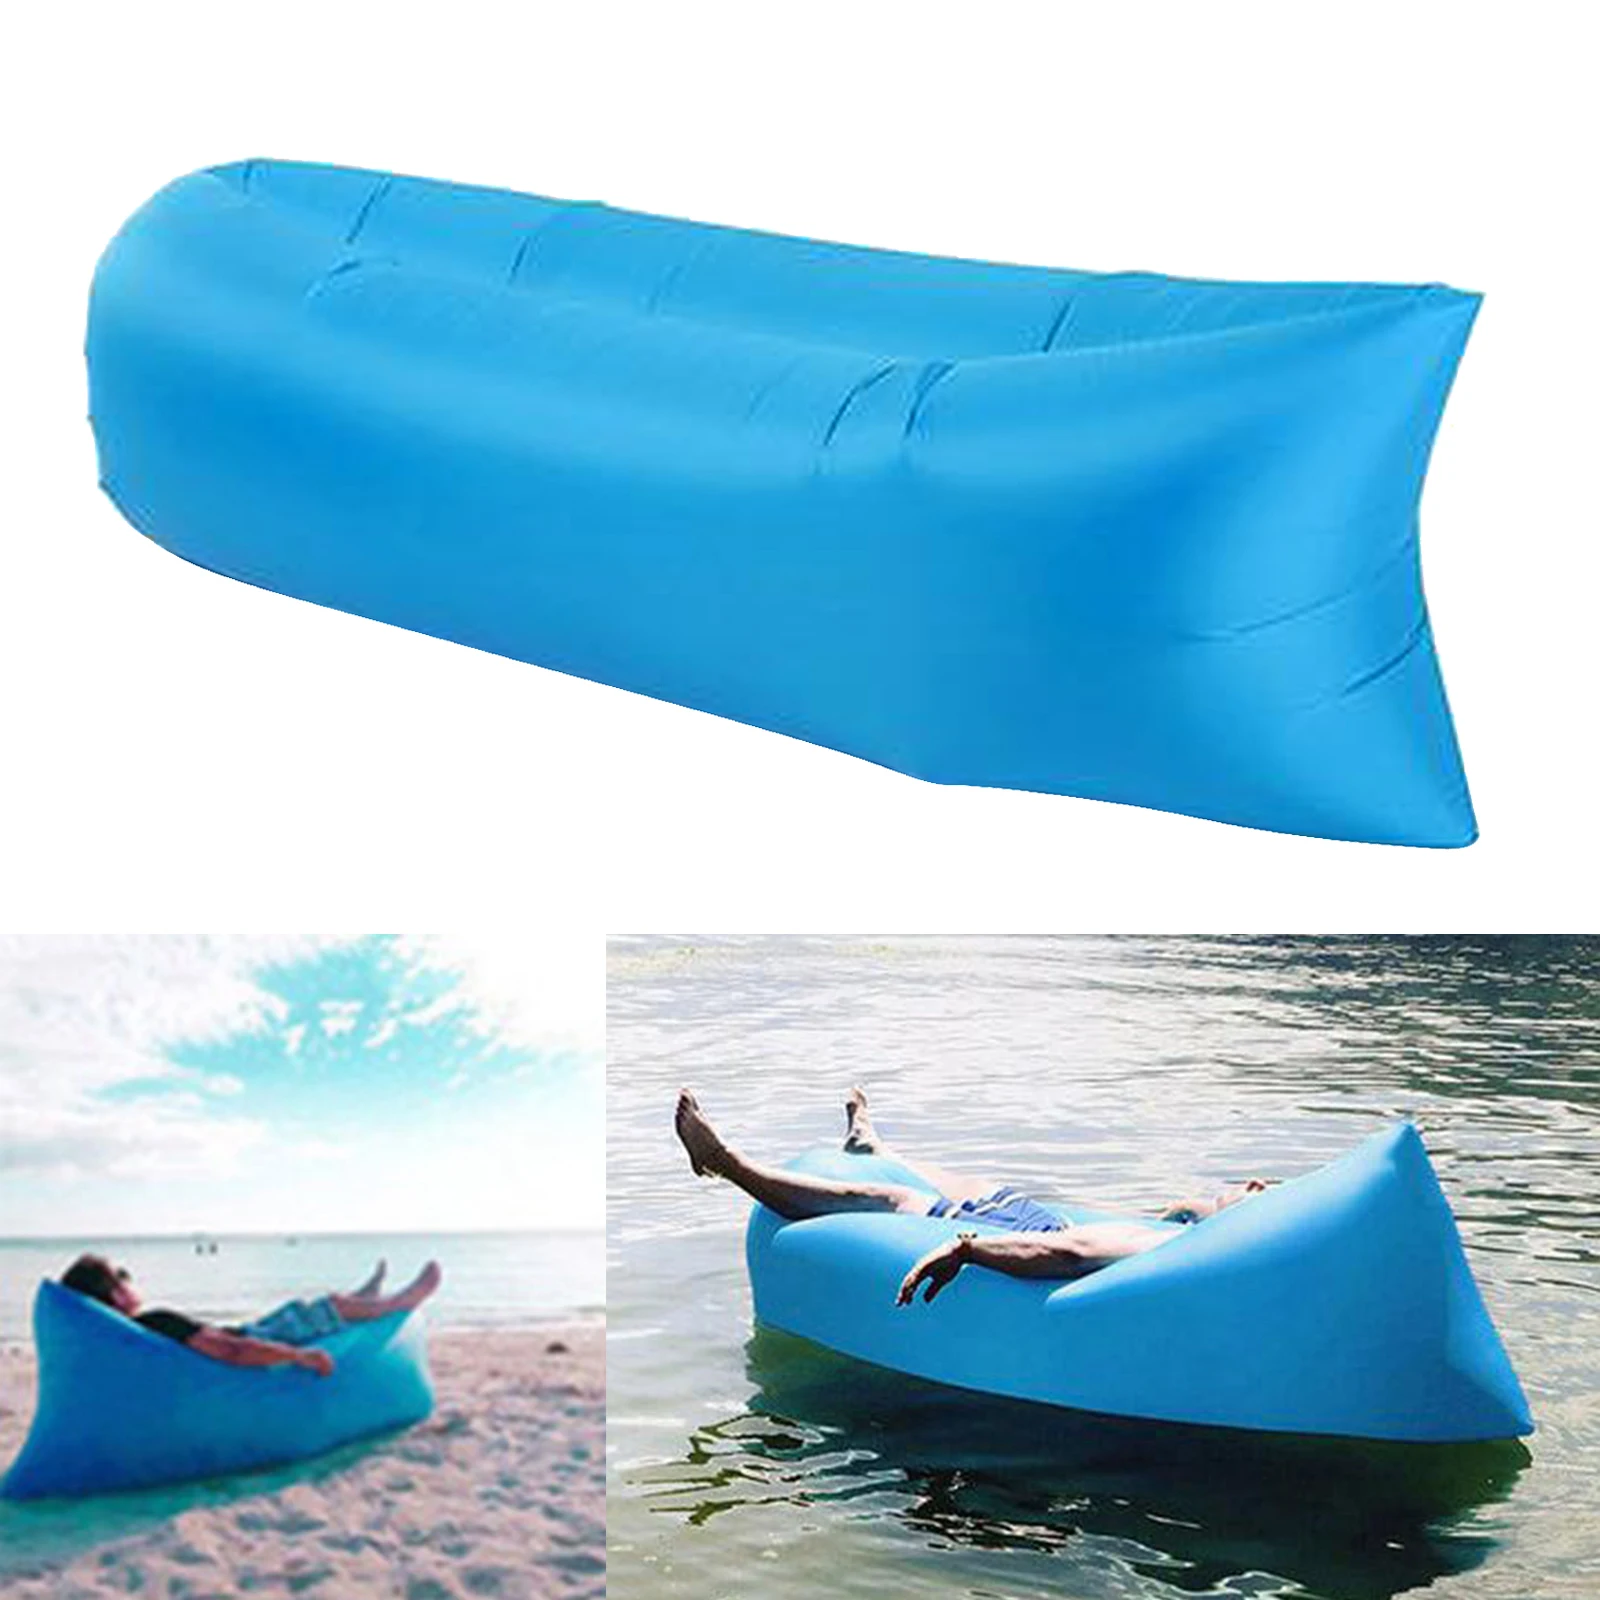 Inflatable Air Bed Sofa Lounger Couch Chair Bag Hangout Outdoor Camping Beach Inflatable Couch Sofa Indoor Outdoor Adults Kids